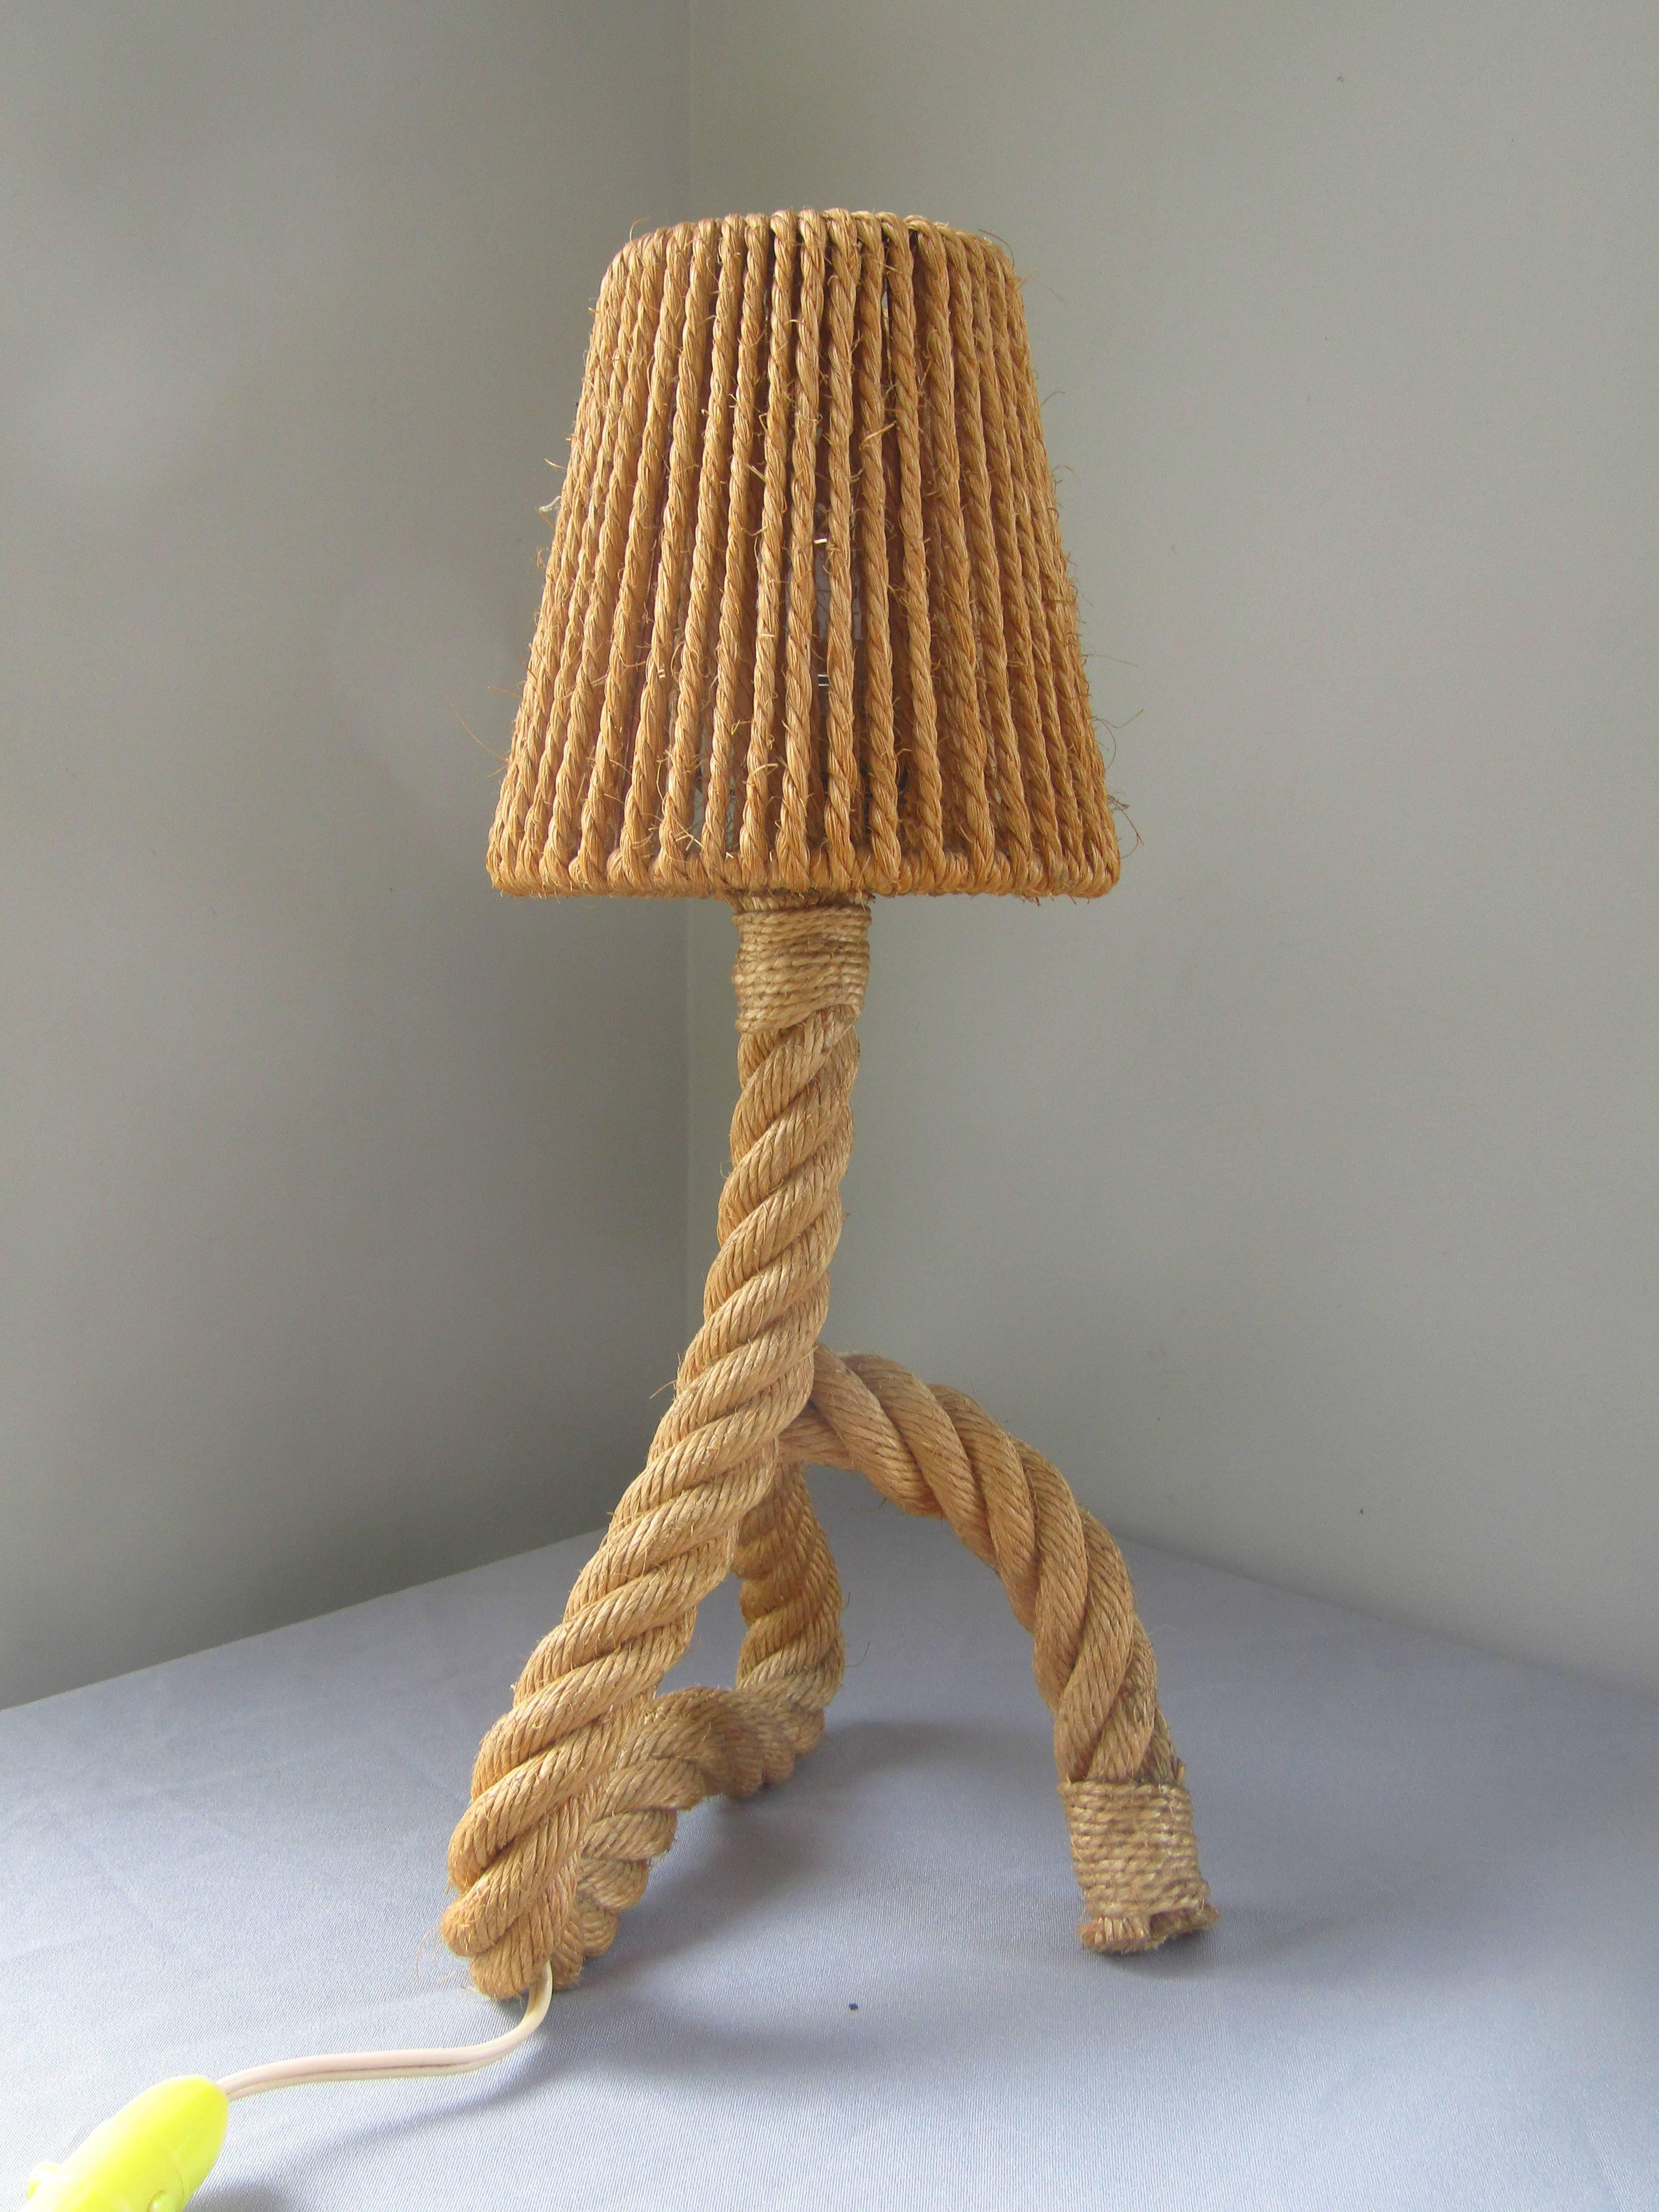 Midcentury Rope Table Desk Lamp Audoux and Minet, France, 1960s. good vintage condition, original shade!

*** free shipping anywhere in the world! ***